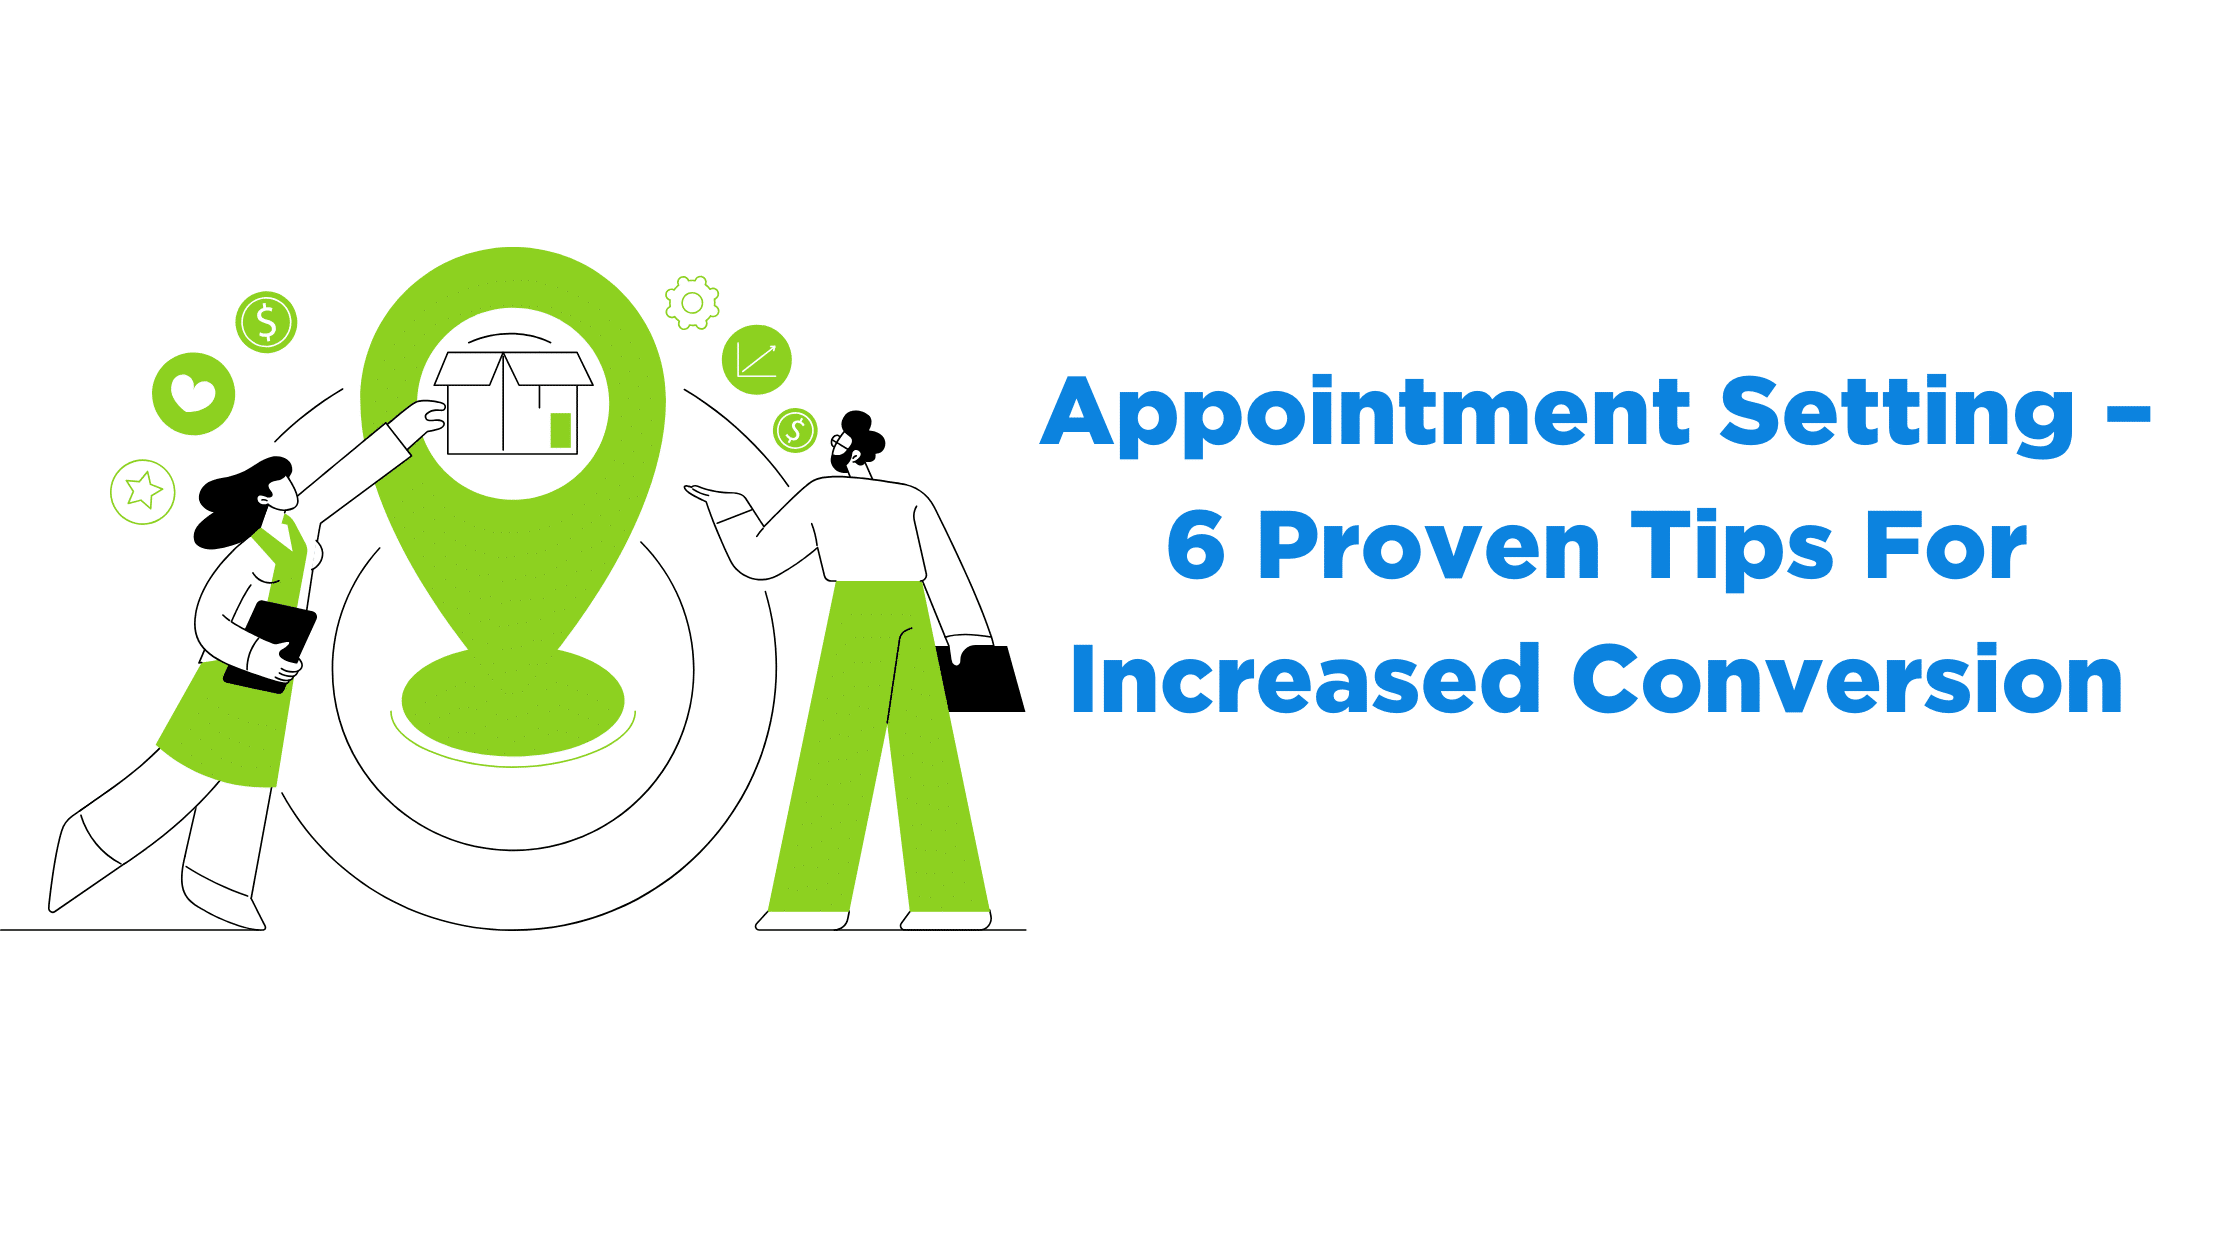 Appointment Setting – 6 Proven Tips For Increased Conversion